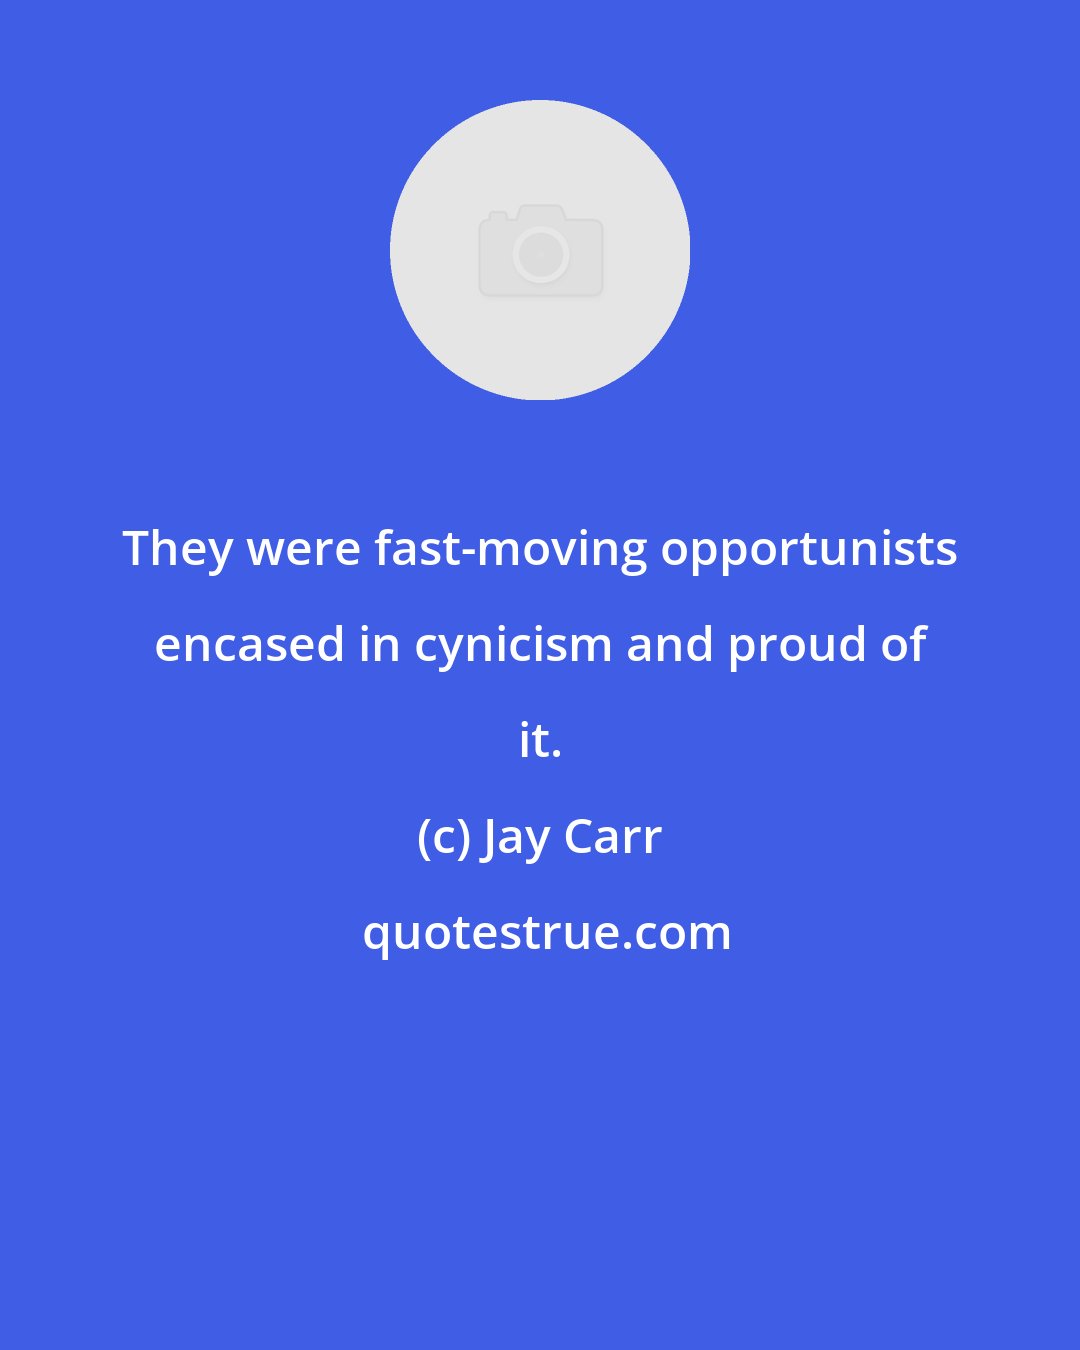 Jay Carr: They were fast-moving opportunists encased in cynicism and proud of it.